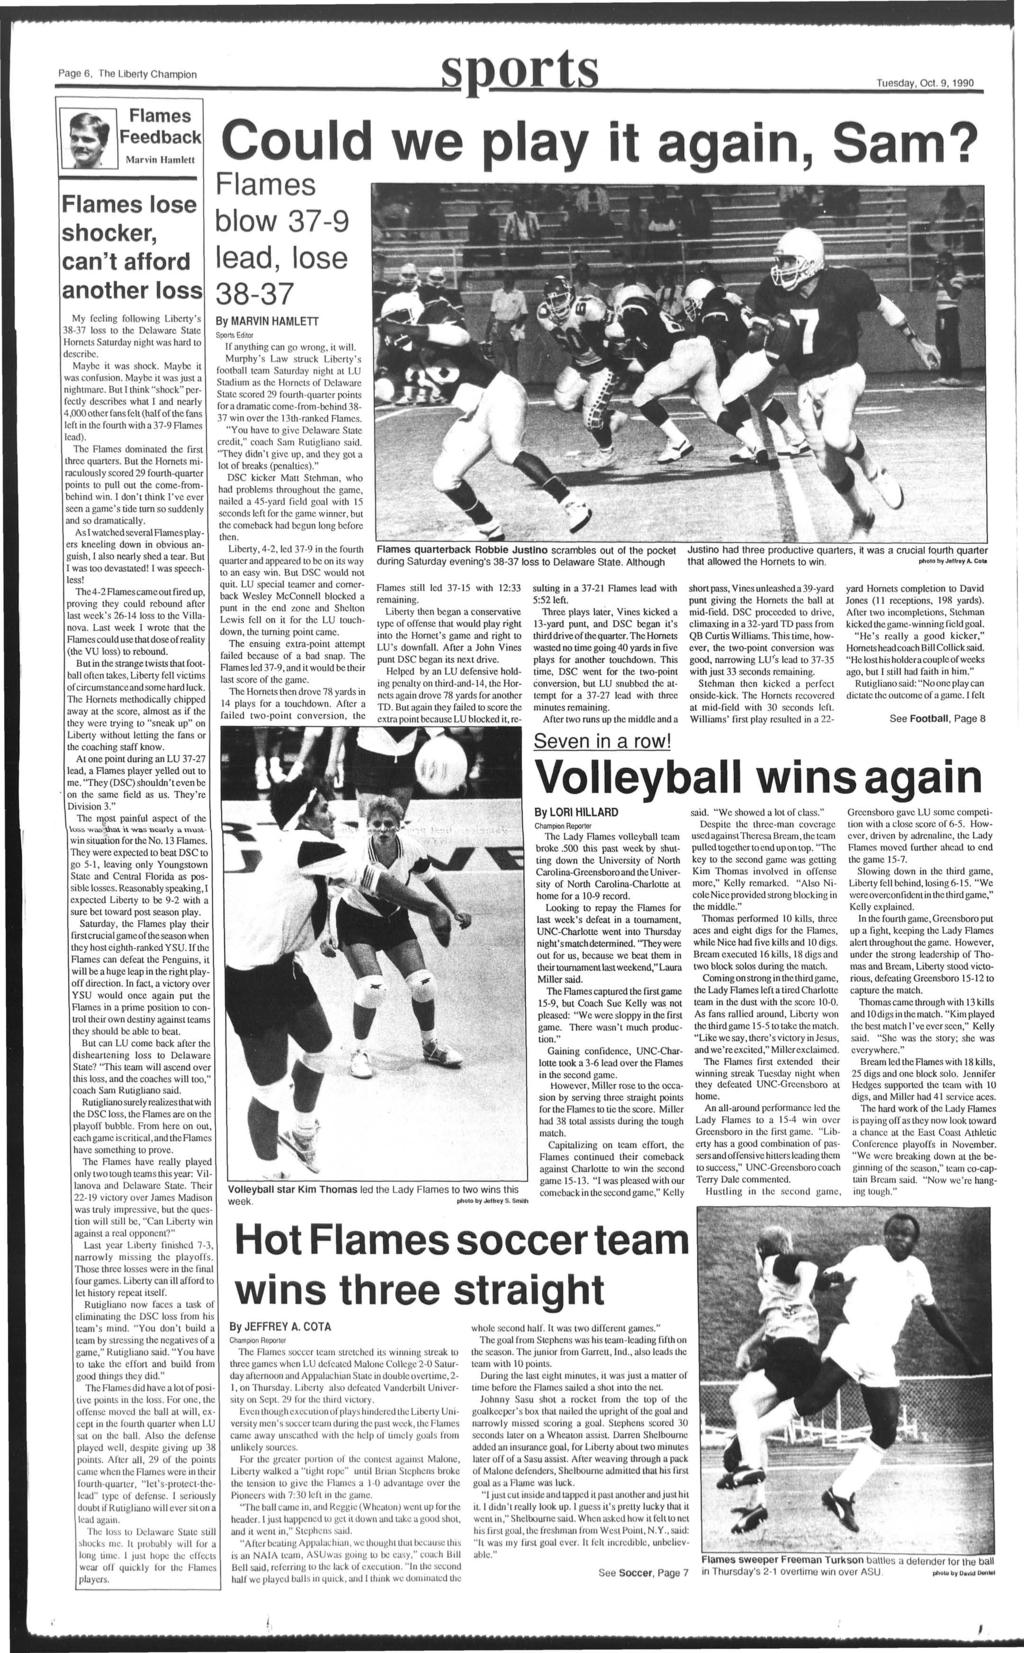 Page 6, The Lberty Champon Flames Feedback Marvn Hamlett Flames lose shocker, can't afford another loss My feelng followng Lberty's 38-37 loss to the Delaware State Hornets Saturday nght was hard to